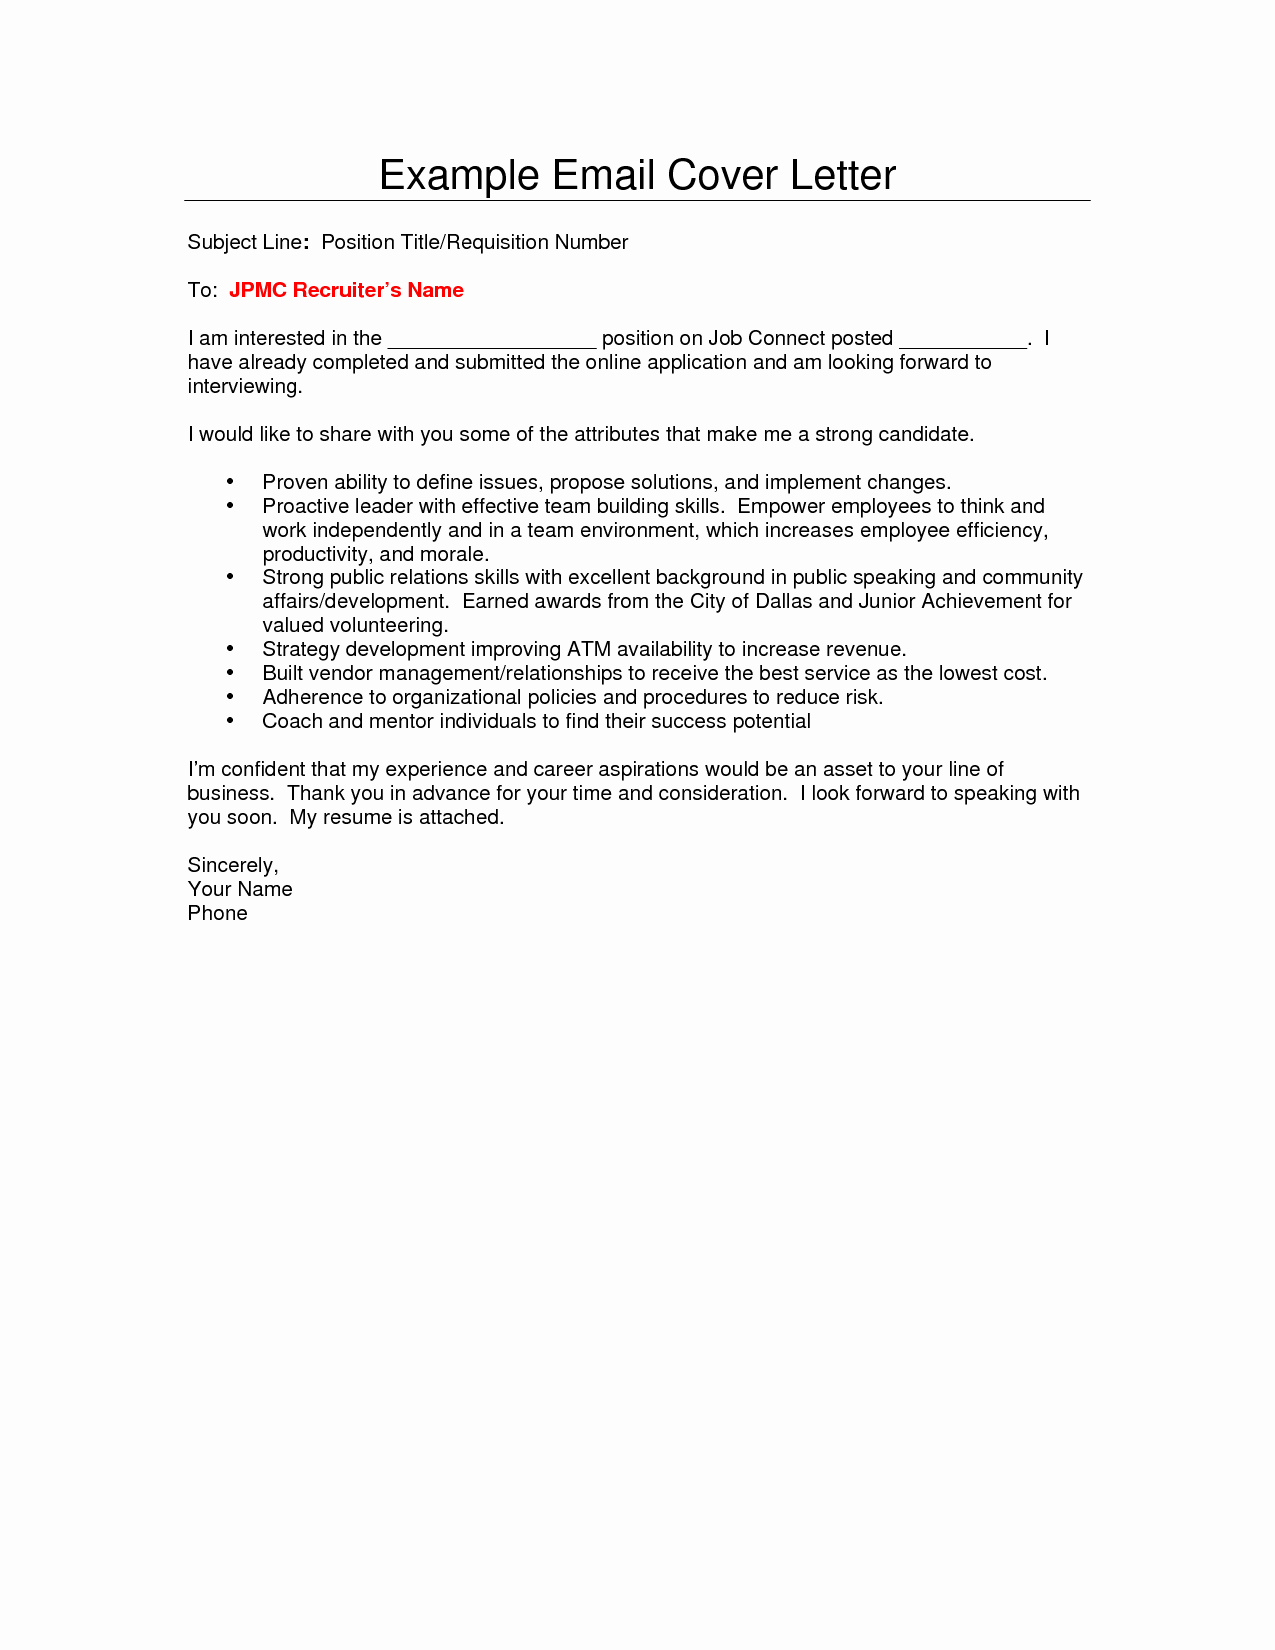 What is the format for An Email Cover Letter